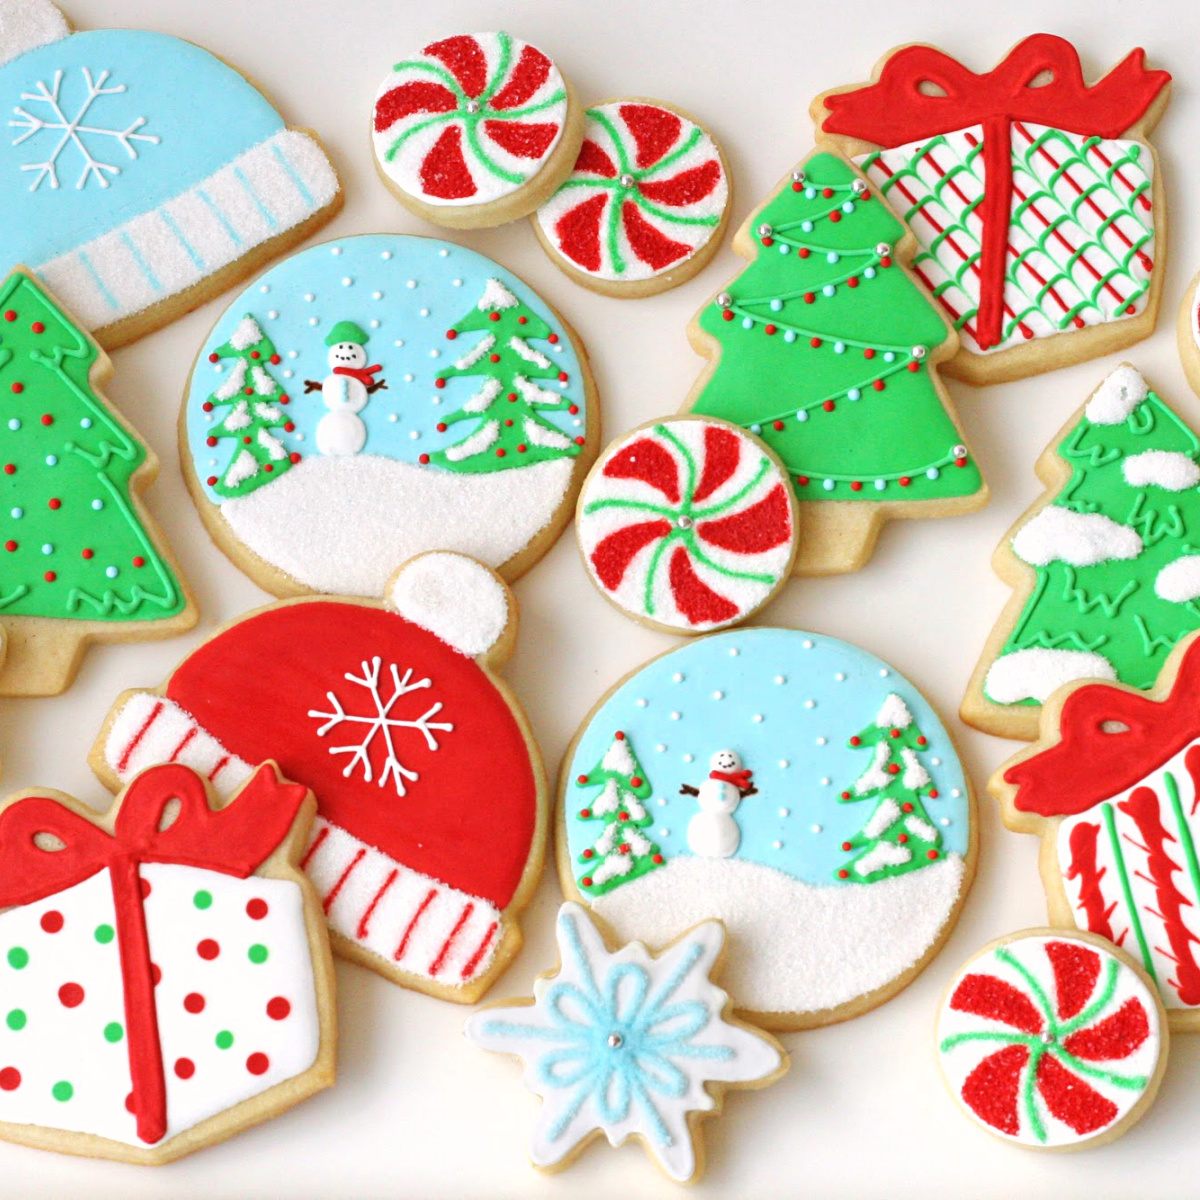 Paper Christmas Cookies - A Wonderful Thought